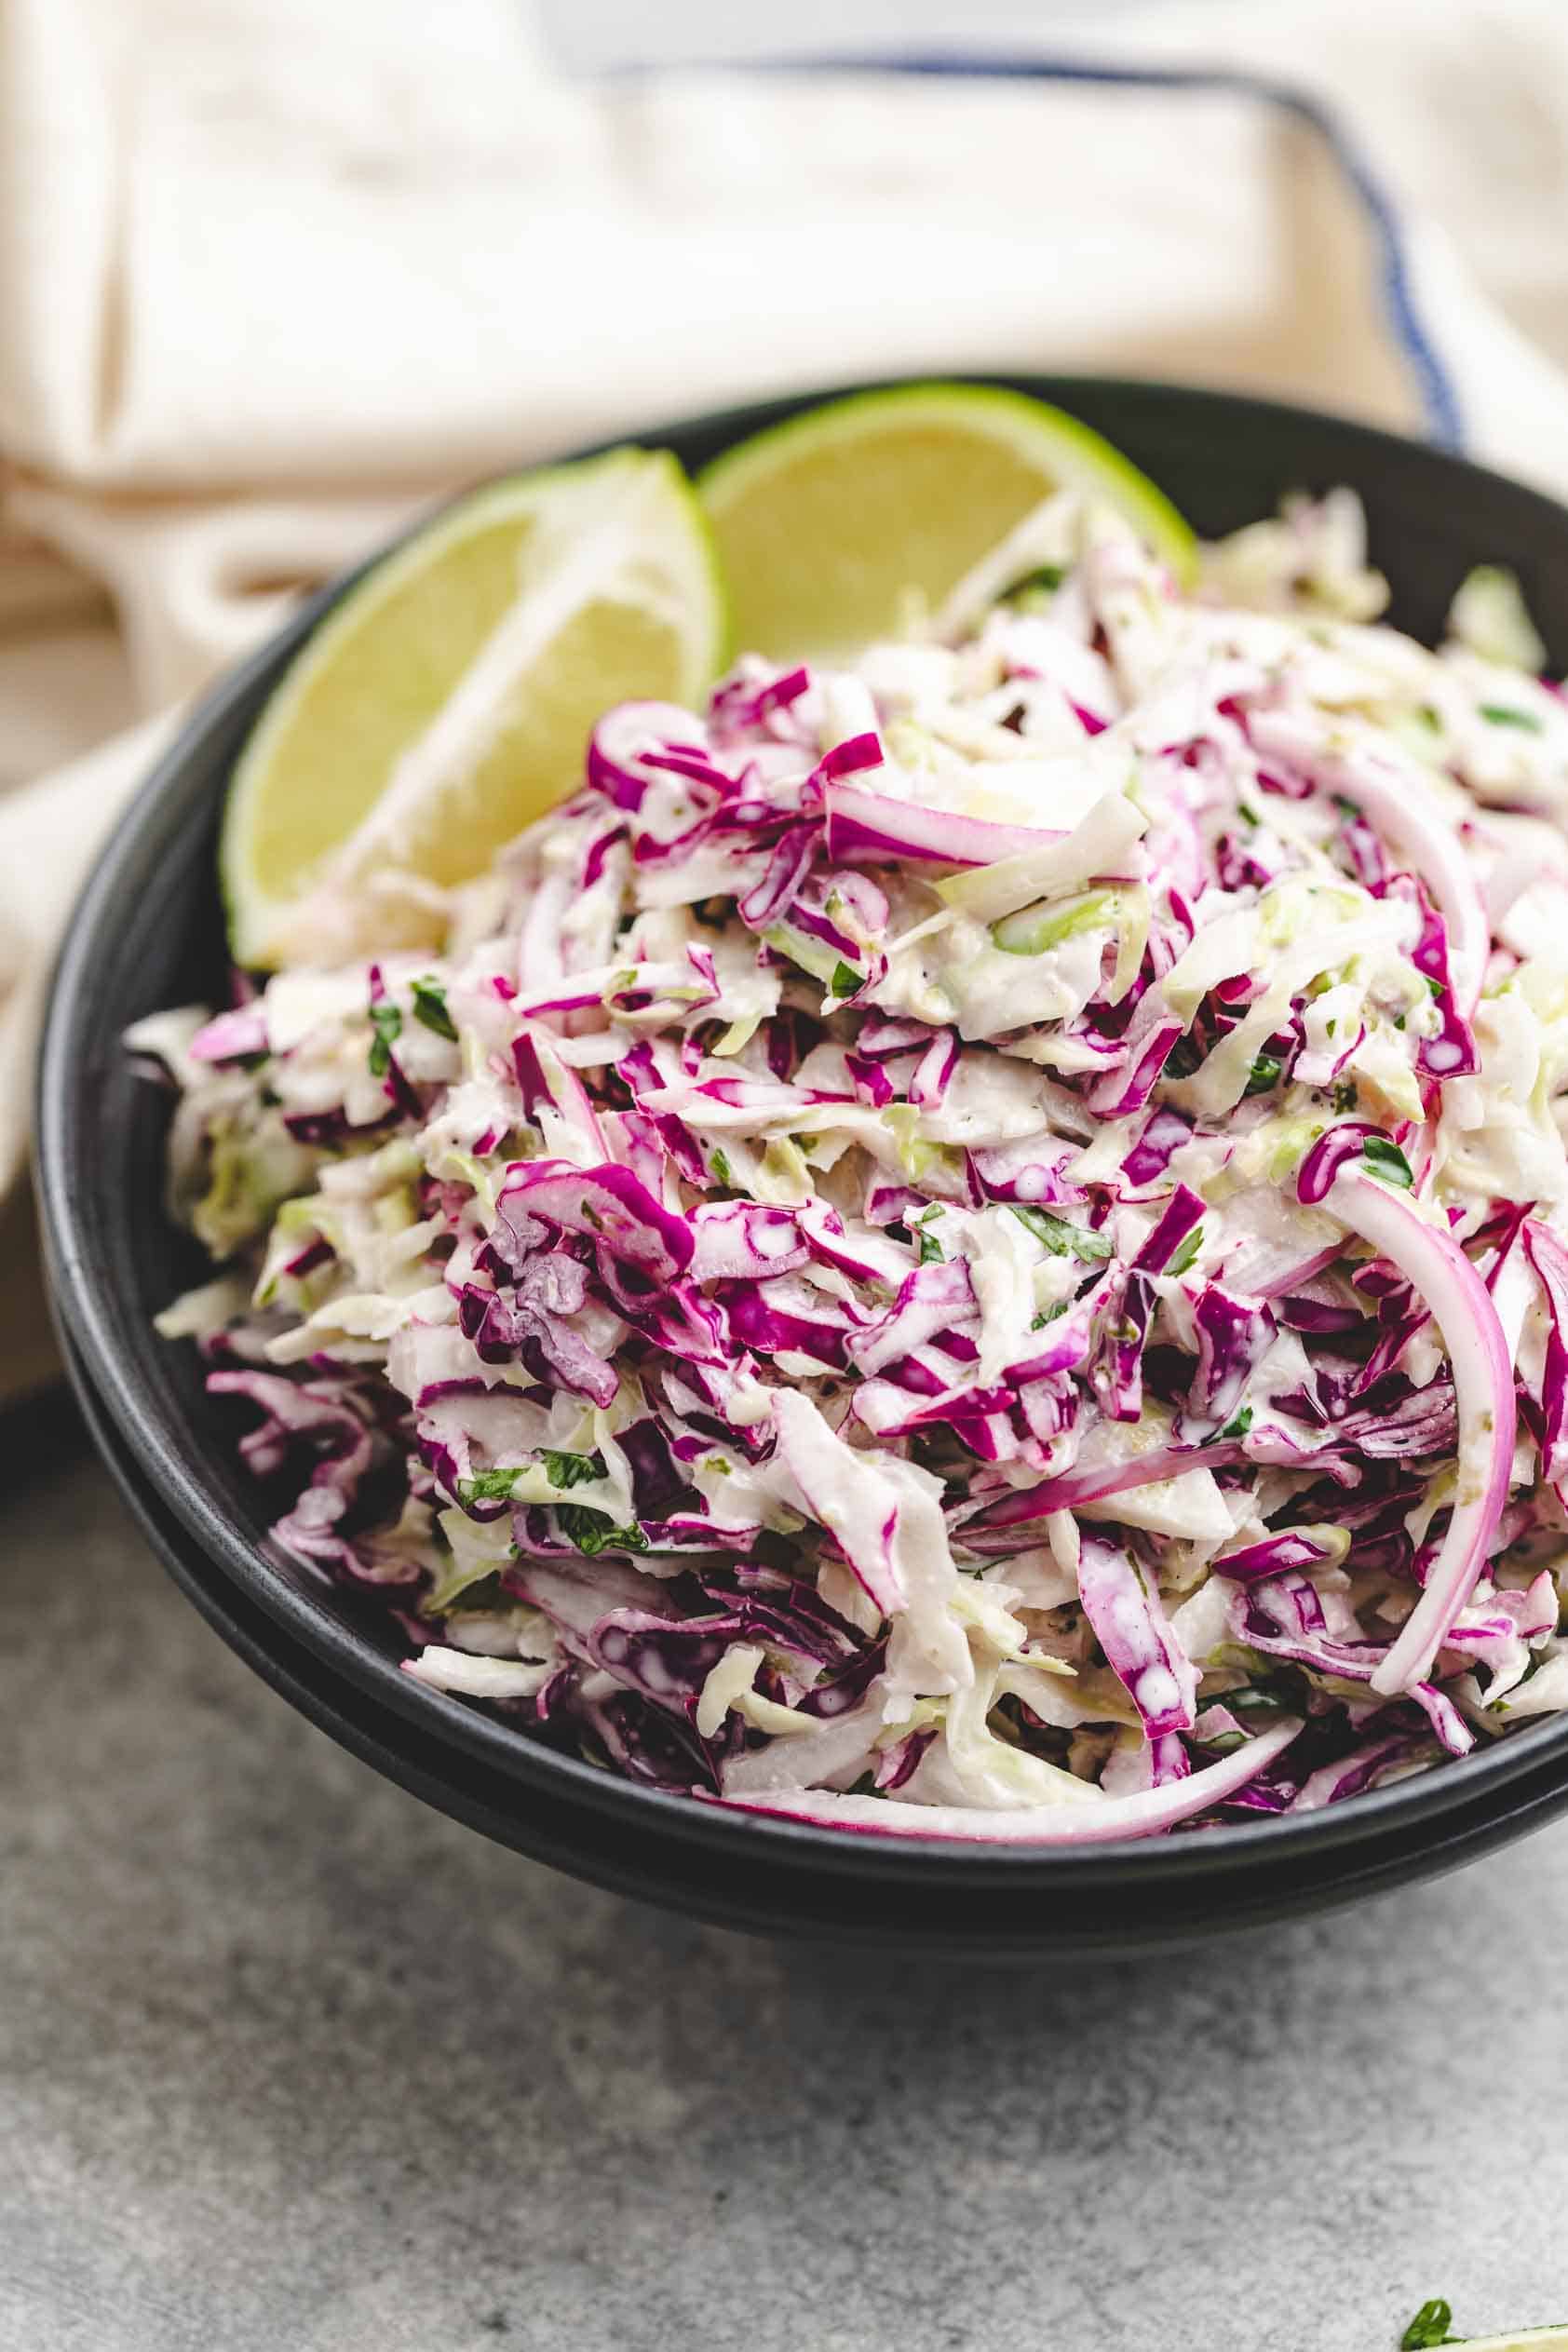 Limes in a bowl of cabbage slaw.